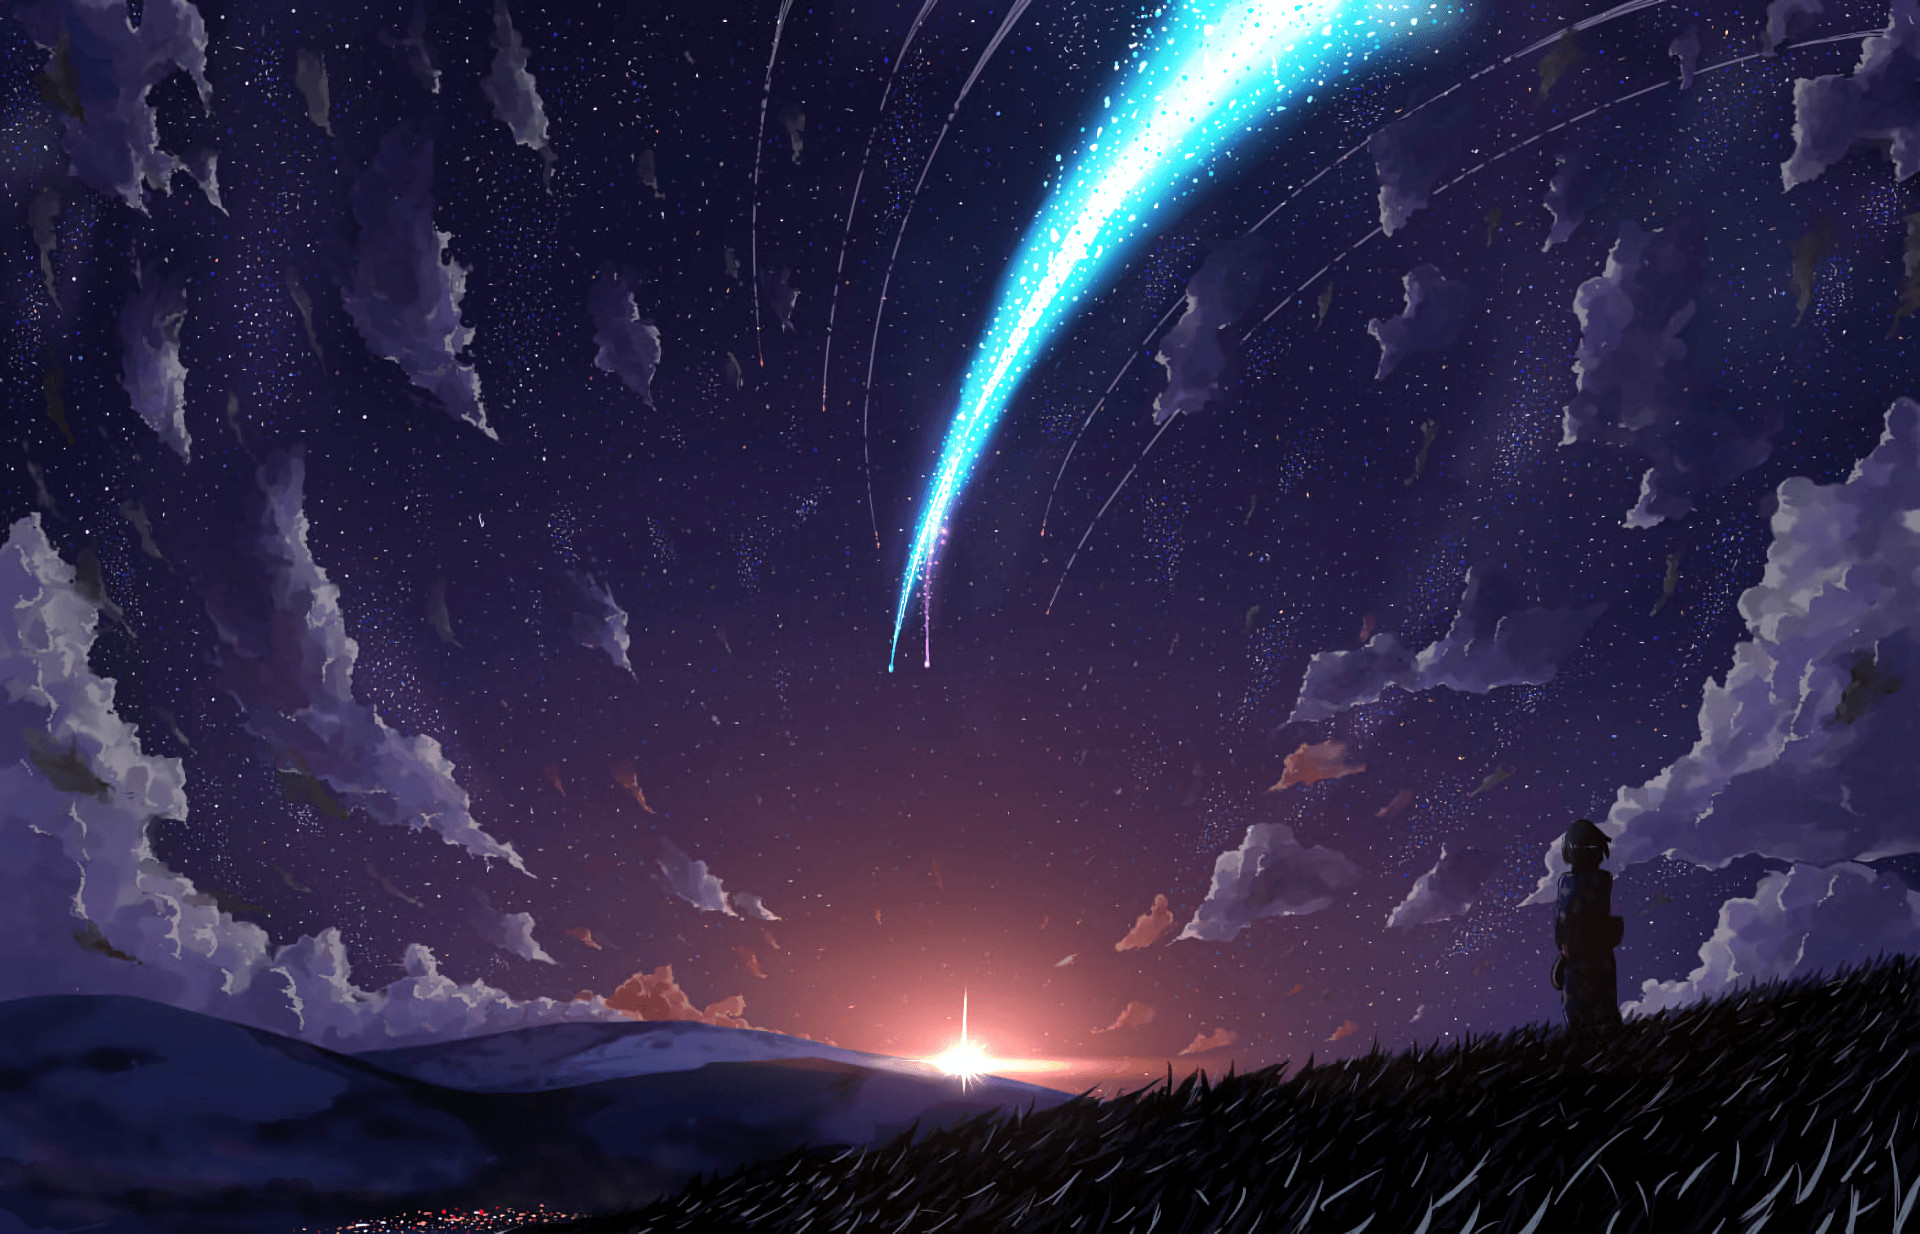 1920x1234 703 Kimi No Na Wa. HD Wallpapers | Backgrounds - Wallpaper Abyss .